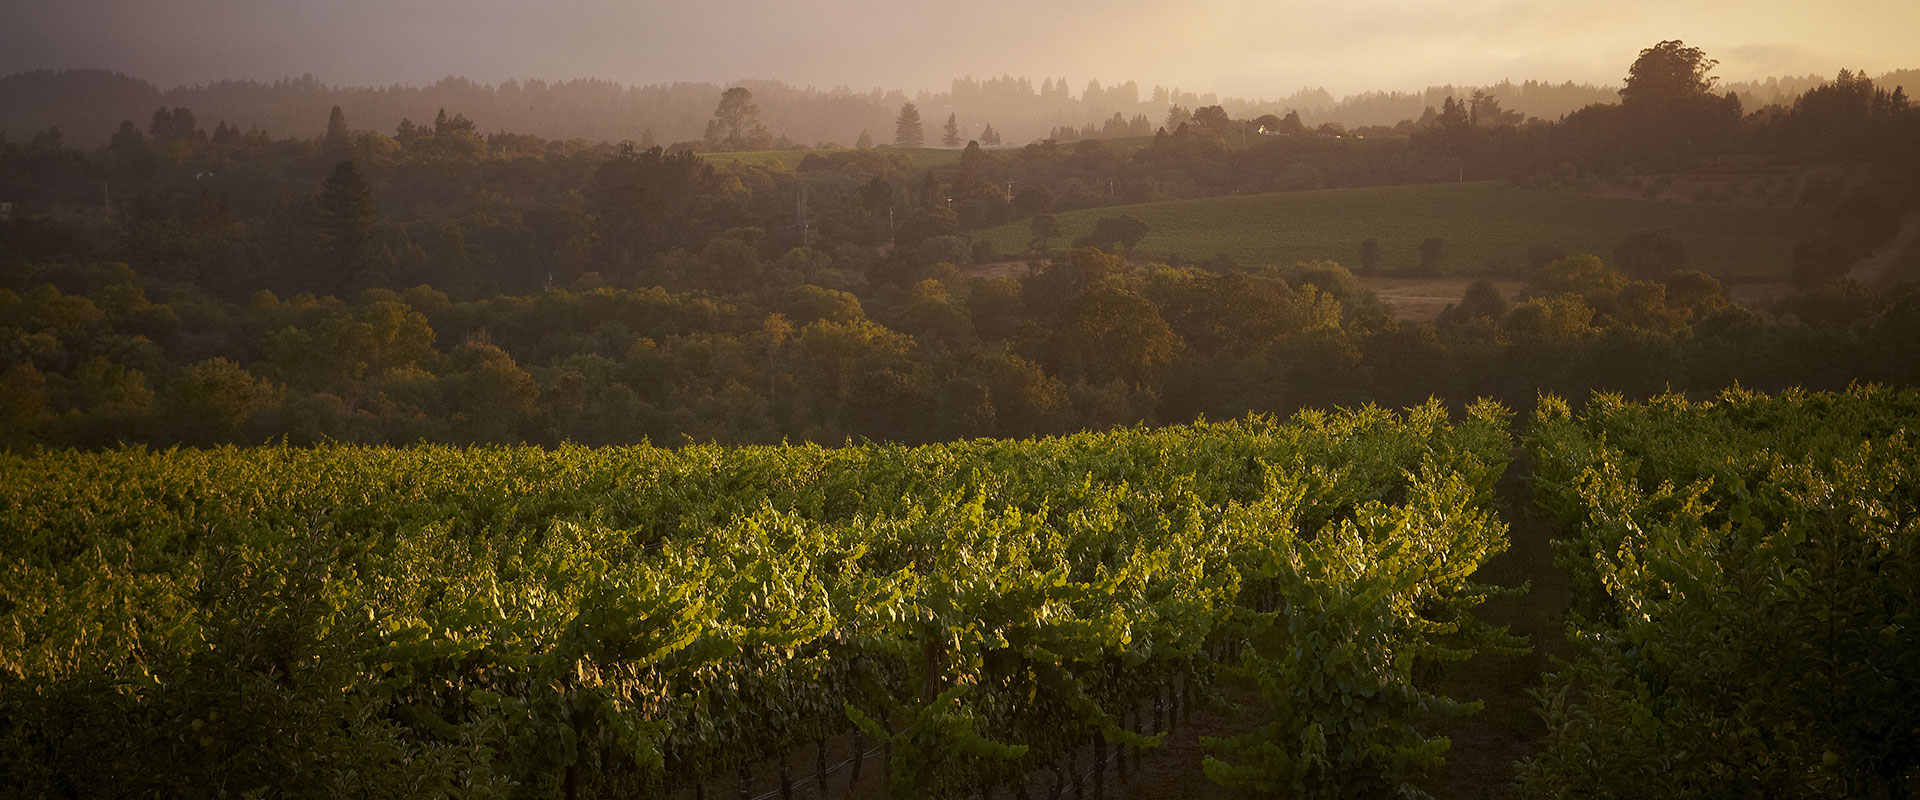 Lush green vineyards at sunset with trees, hills and mountains in the background in a soft warm light